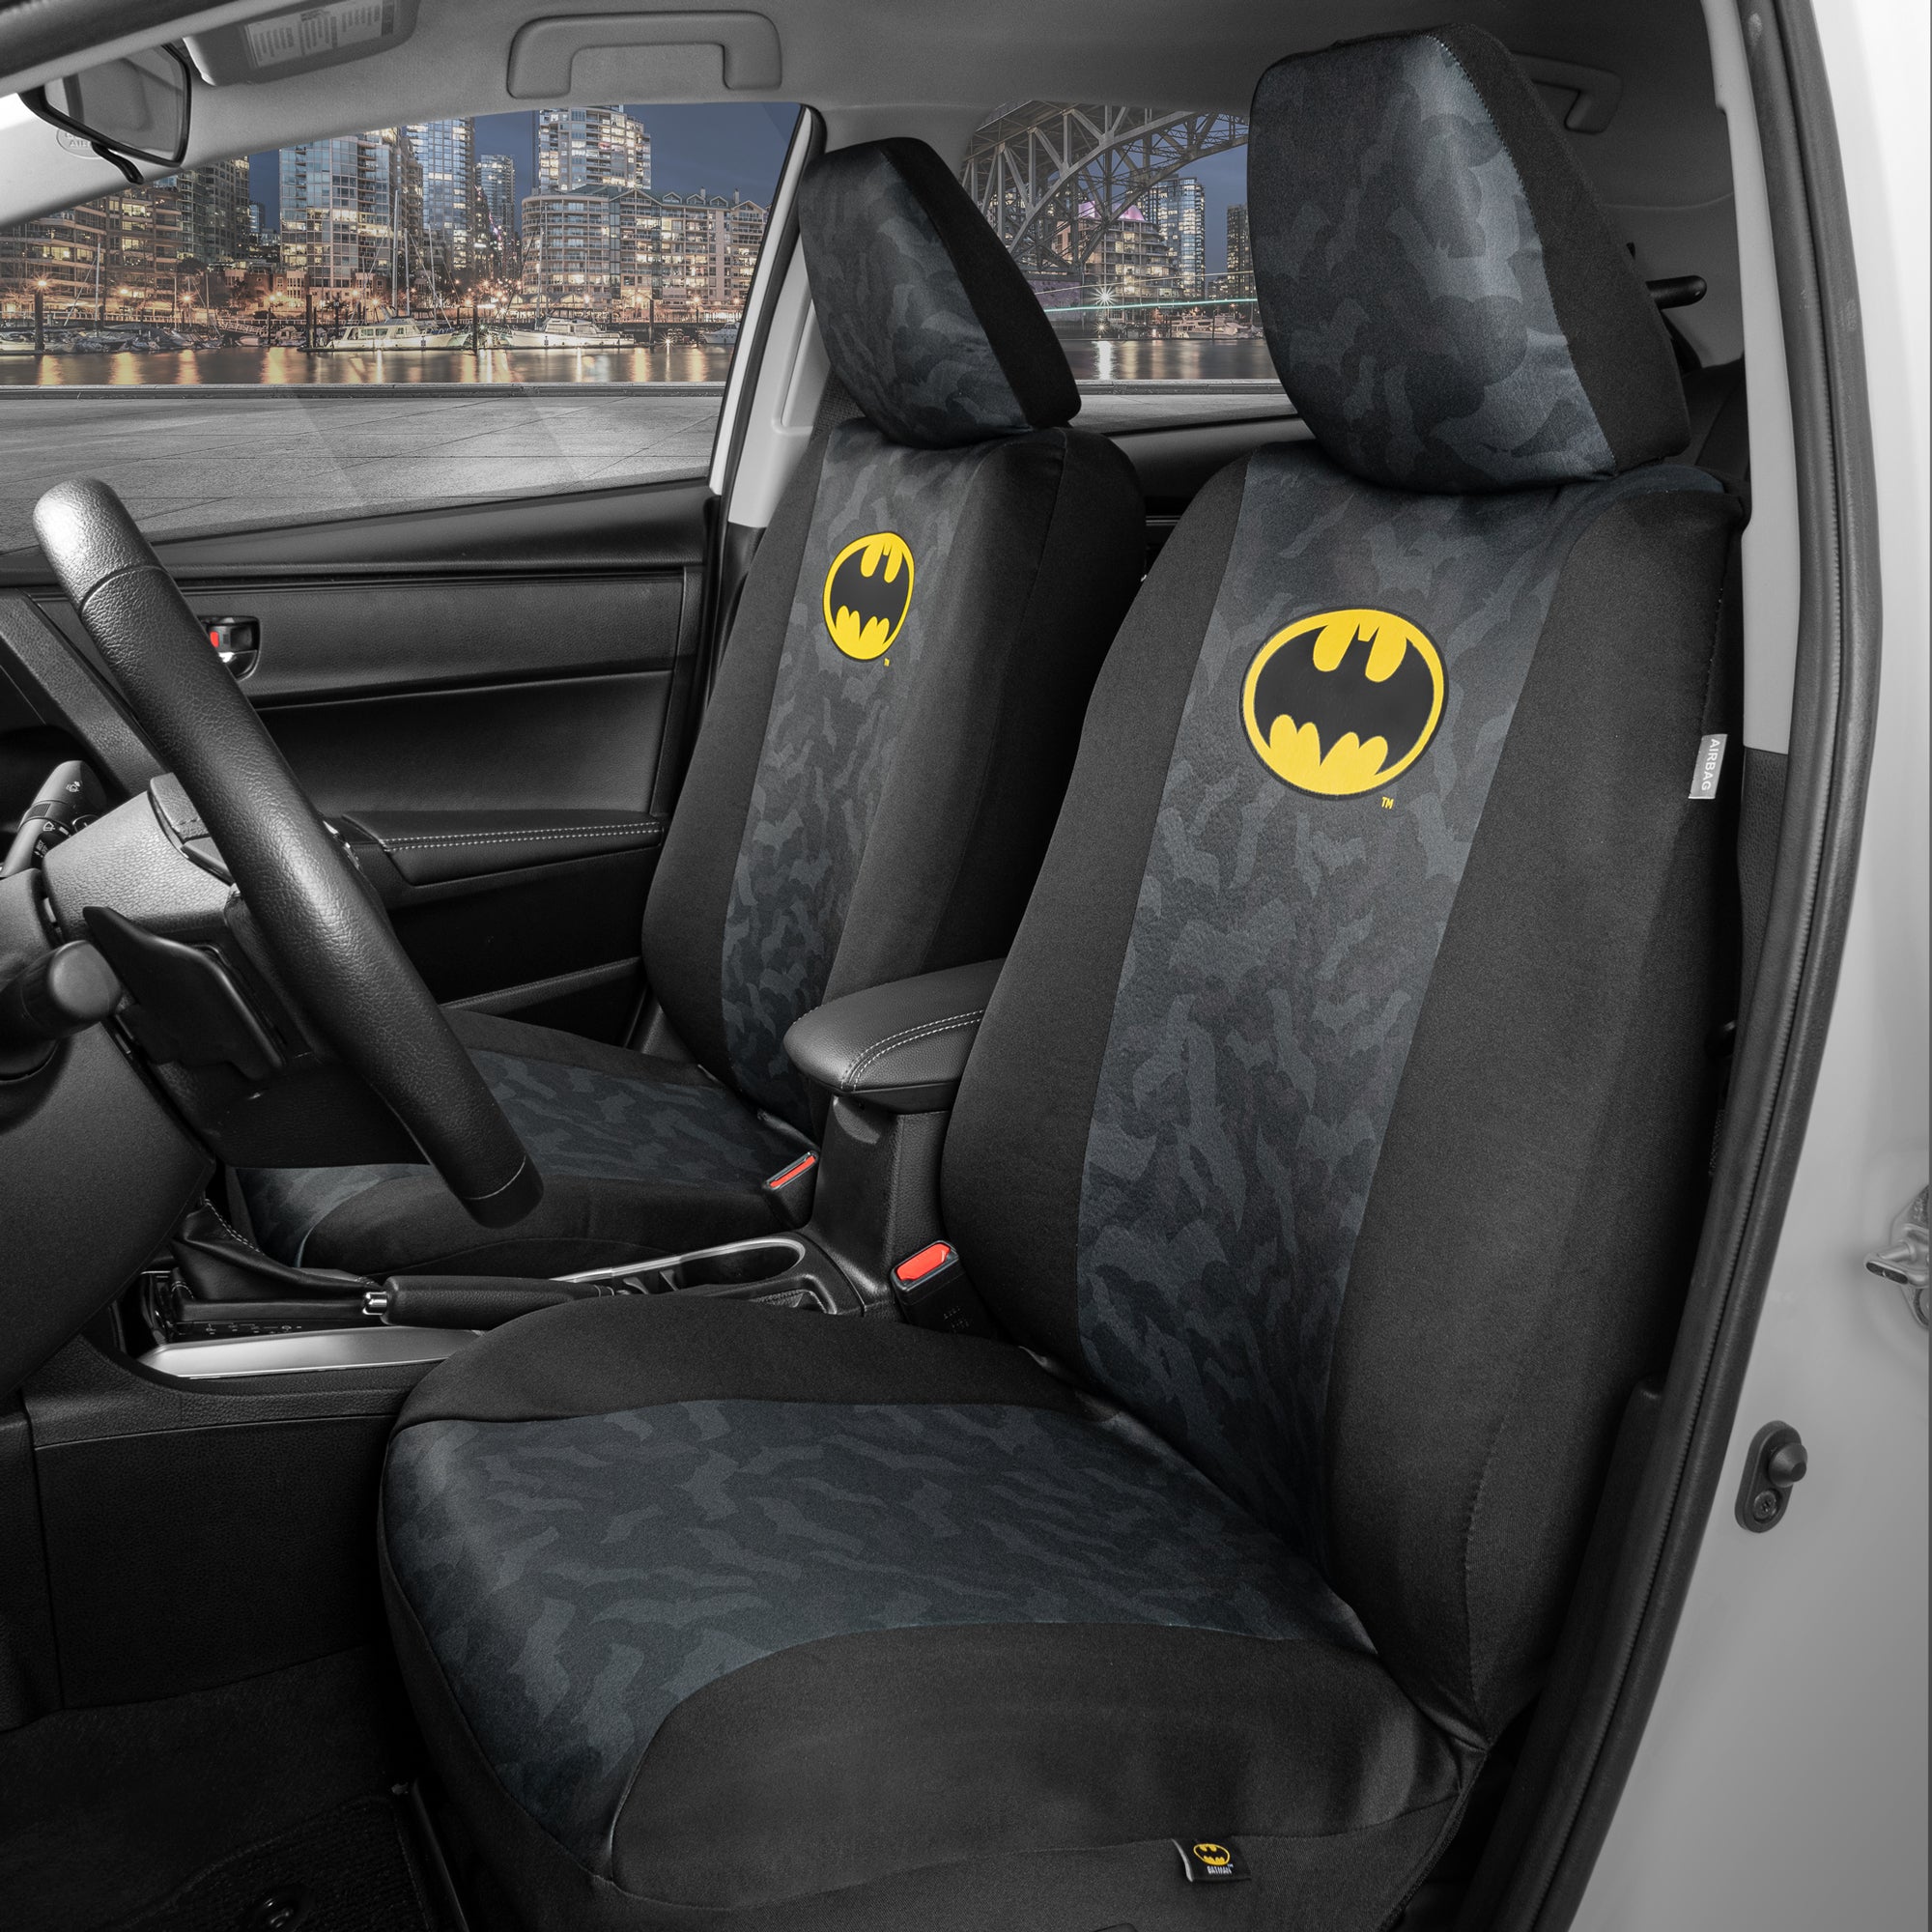 Batman Car Seat Covers for Front Seats with Matching Seat Belt Pads – Officially Licensed Warner Brothers Superhero Auto Accessories Bundle, Made for Car Truck Van and SUV